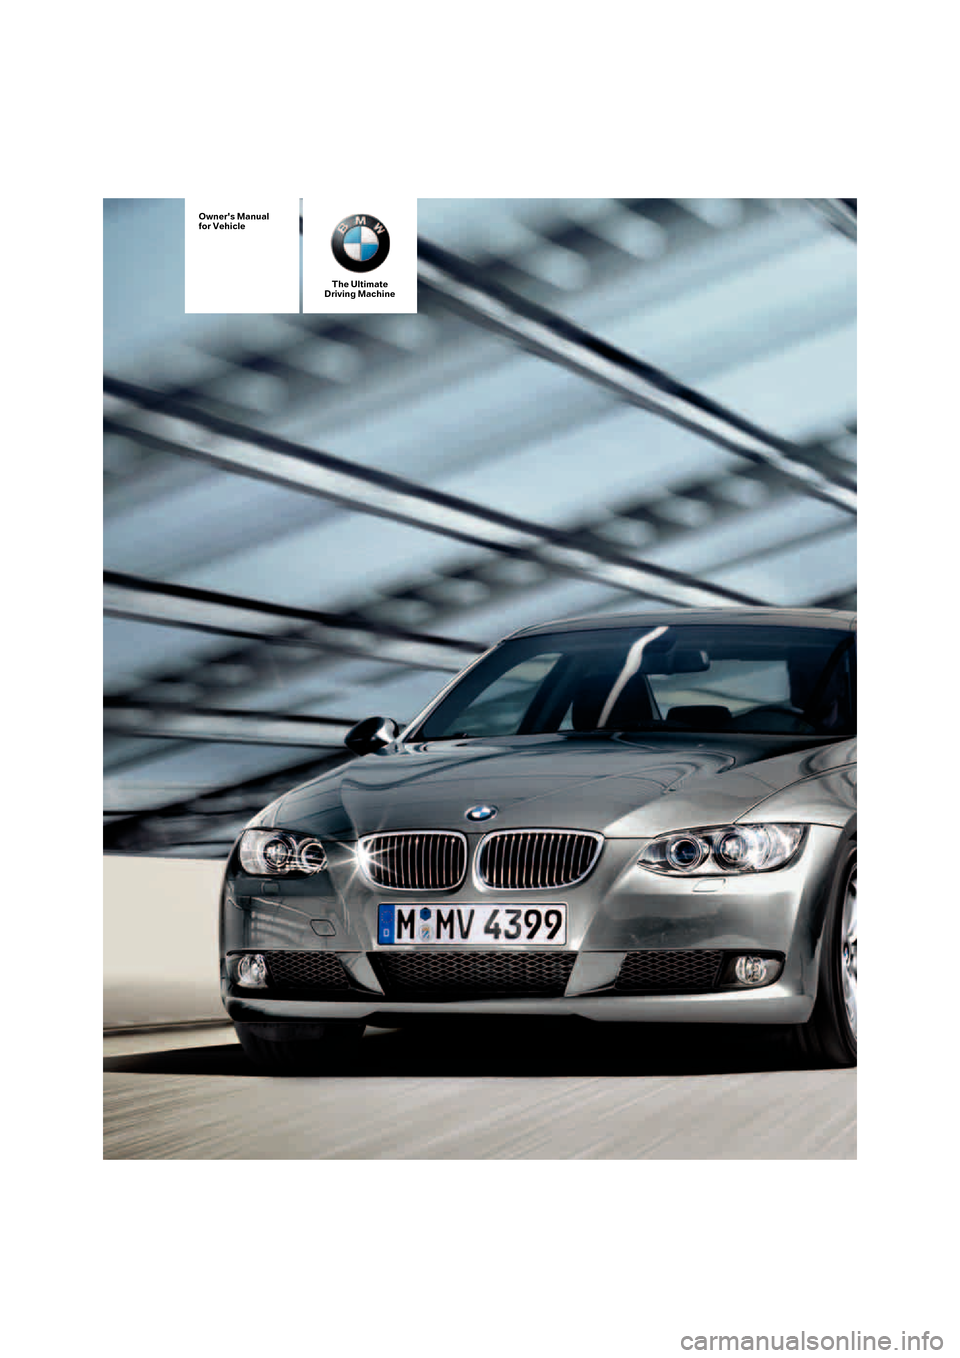 BMW 335I COUPE 2007 E92 Owners Manual The Ultimate
Driving Machine
Owners Manual
for Vehicle 